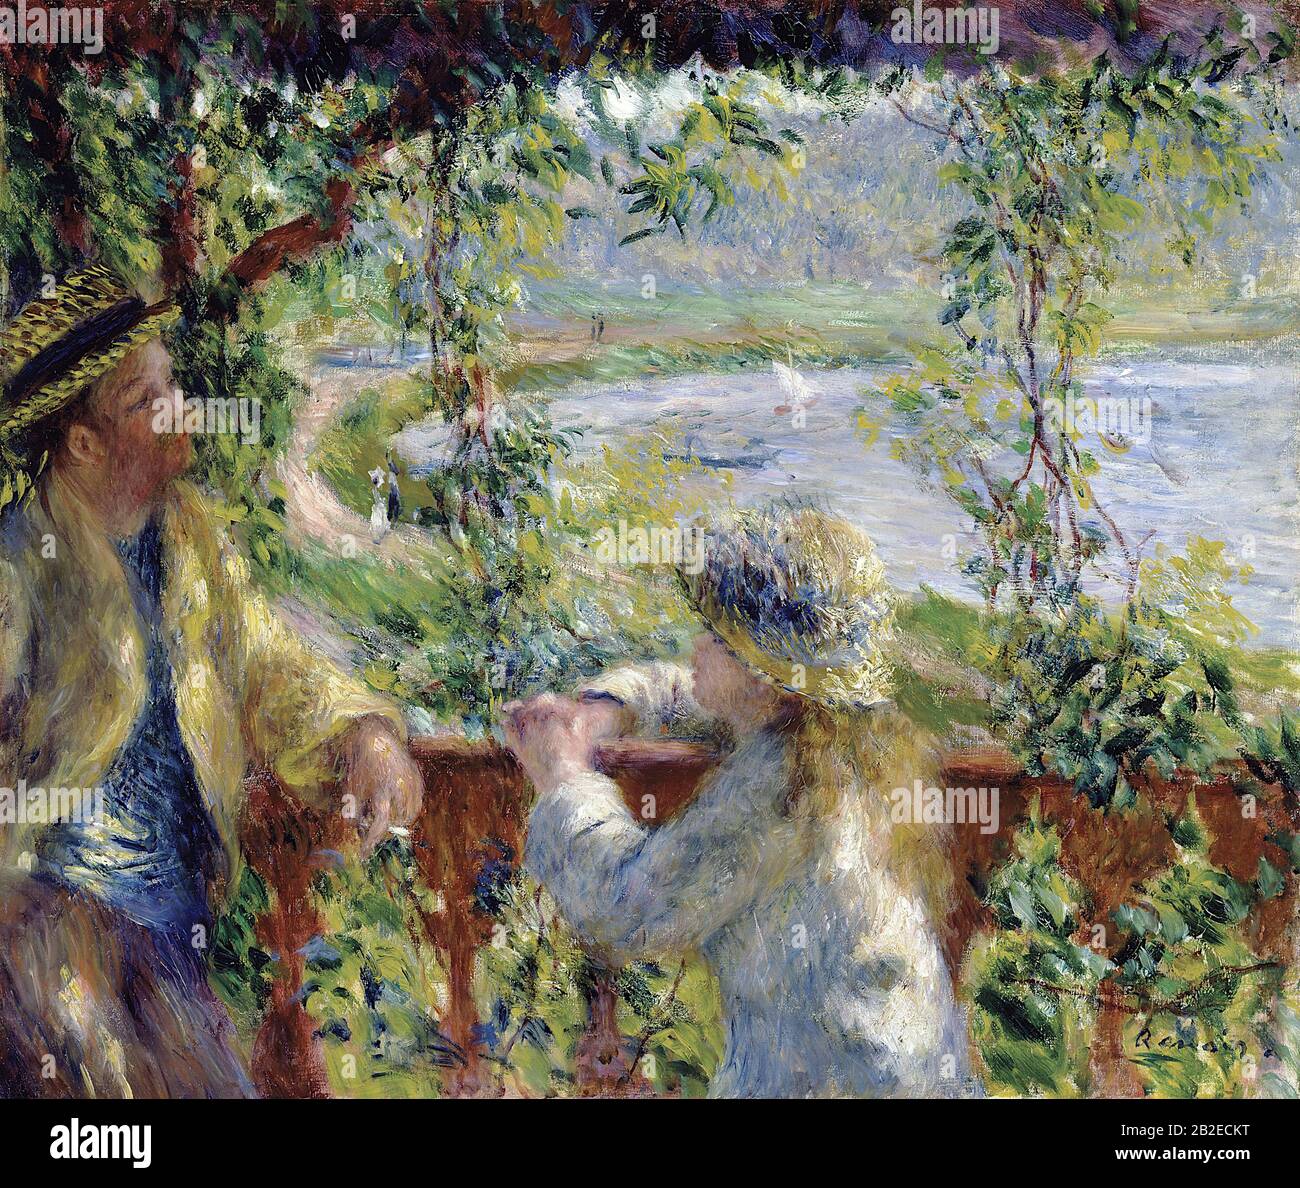 By the Water (Near the Lake) (Circa 1880) - 19th Century Painting by Pierre-Auguste Renoir - Very high resolution and quality image Stock Photo